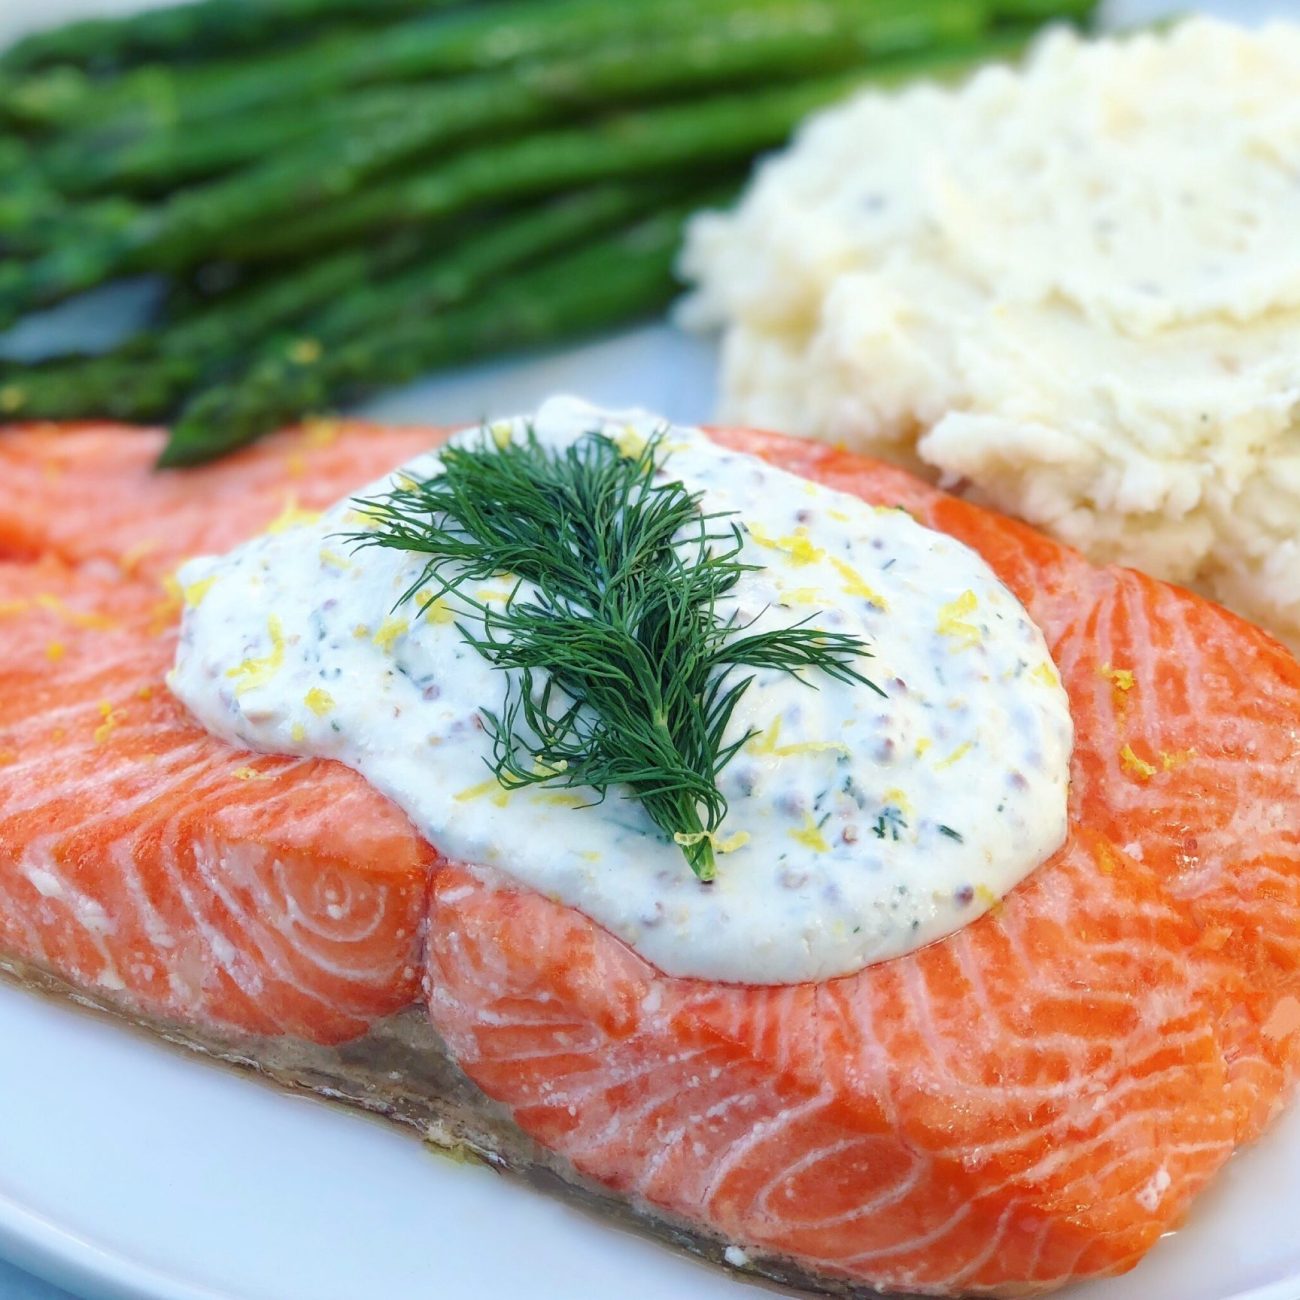 Asparagus And Salmon With Dill Cream